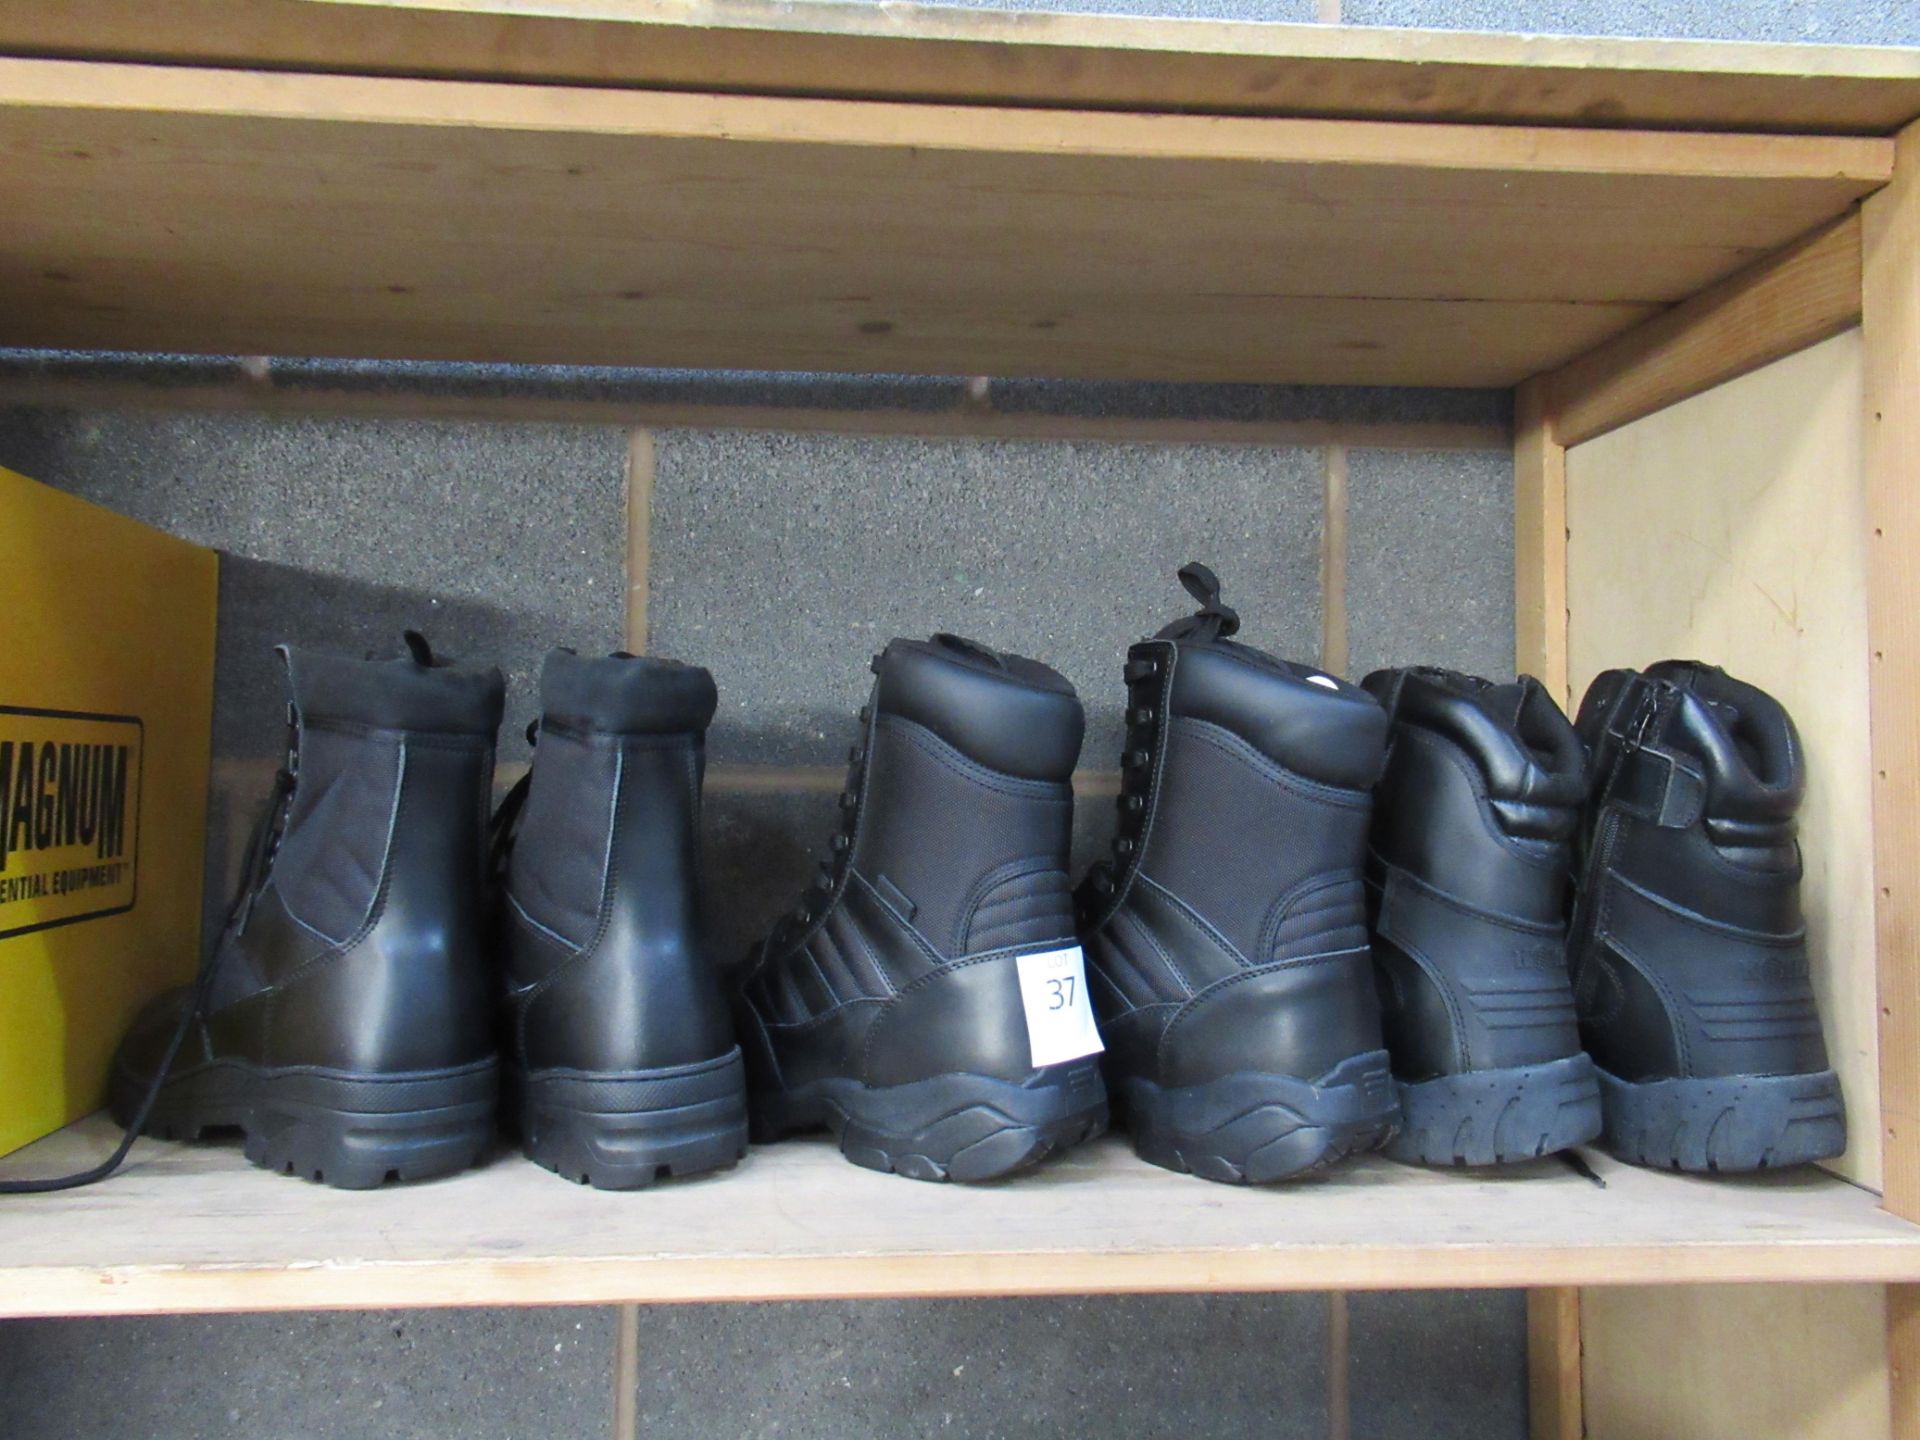 3x pairs of unboxed boots, size 9UK from Kombat Uk(2) and Magnum